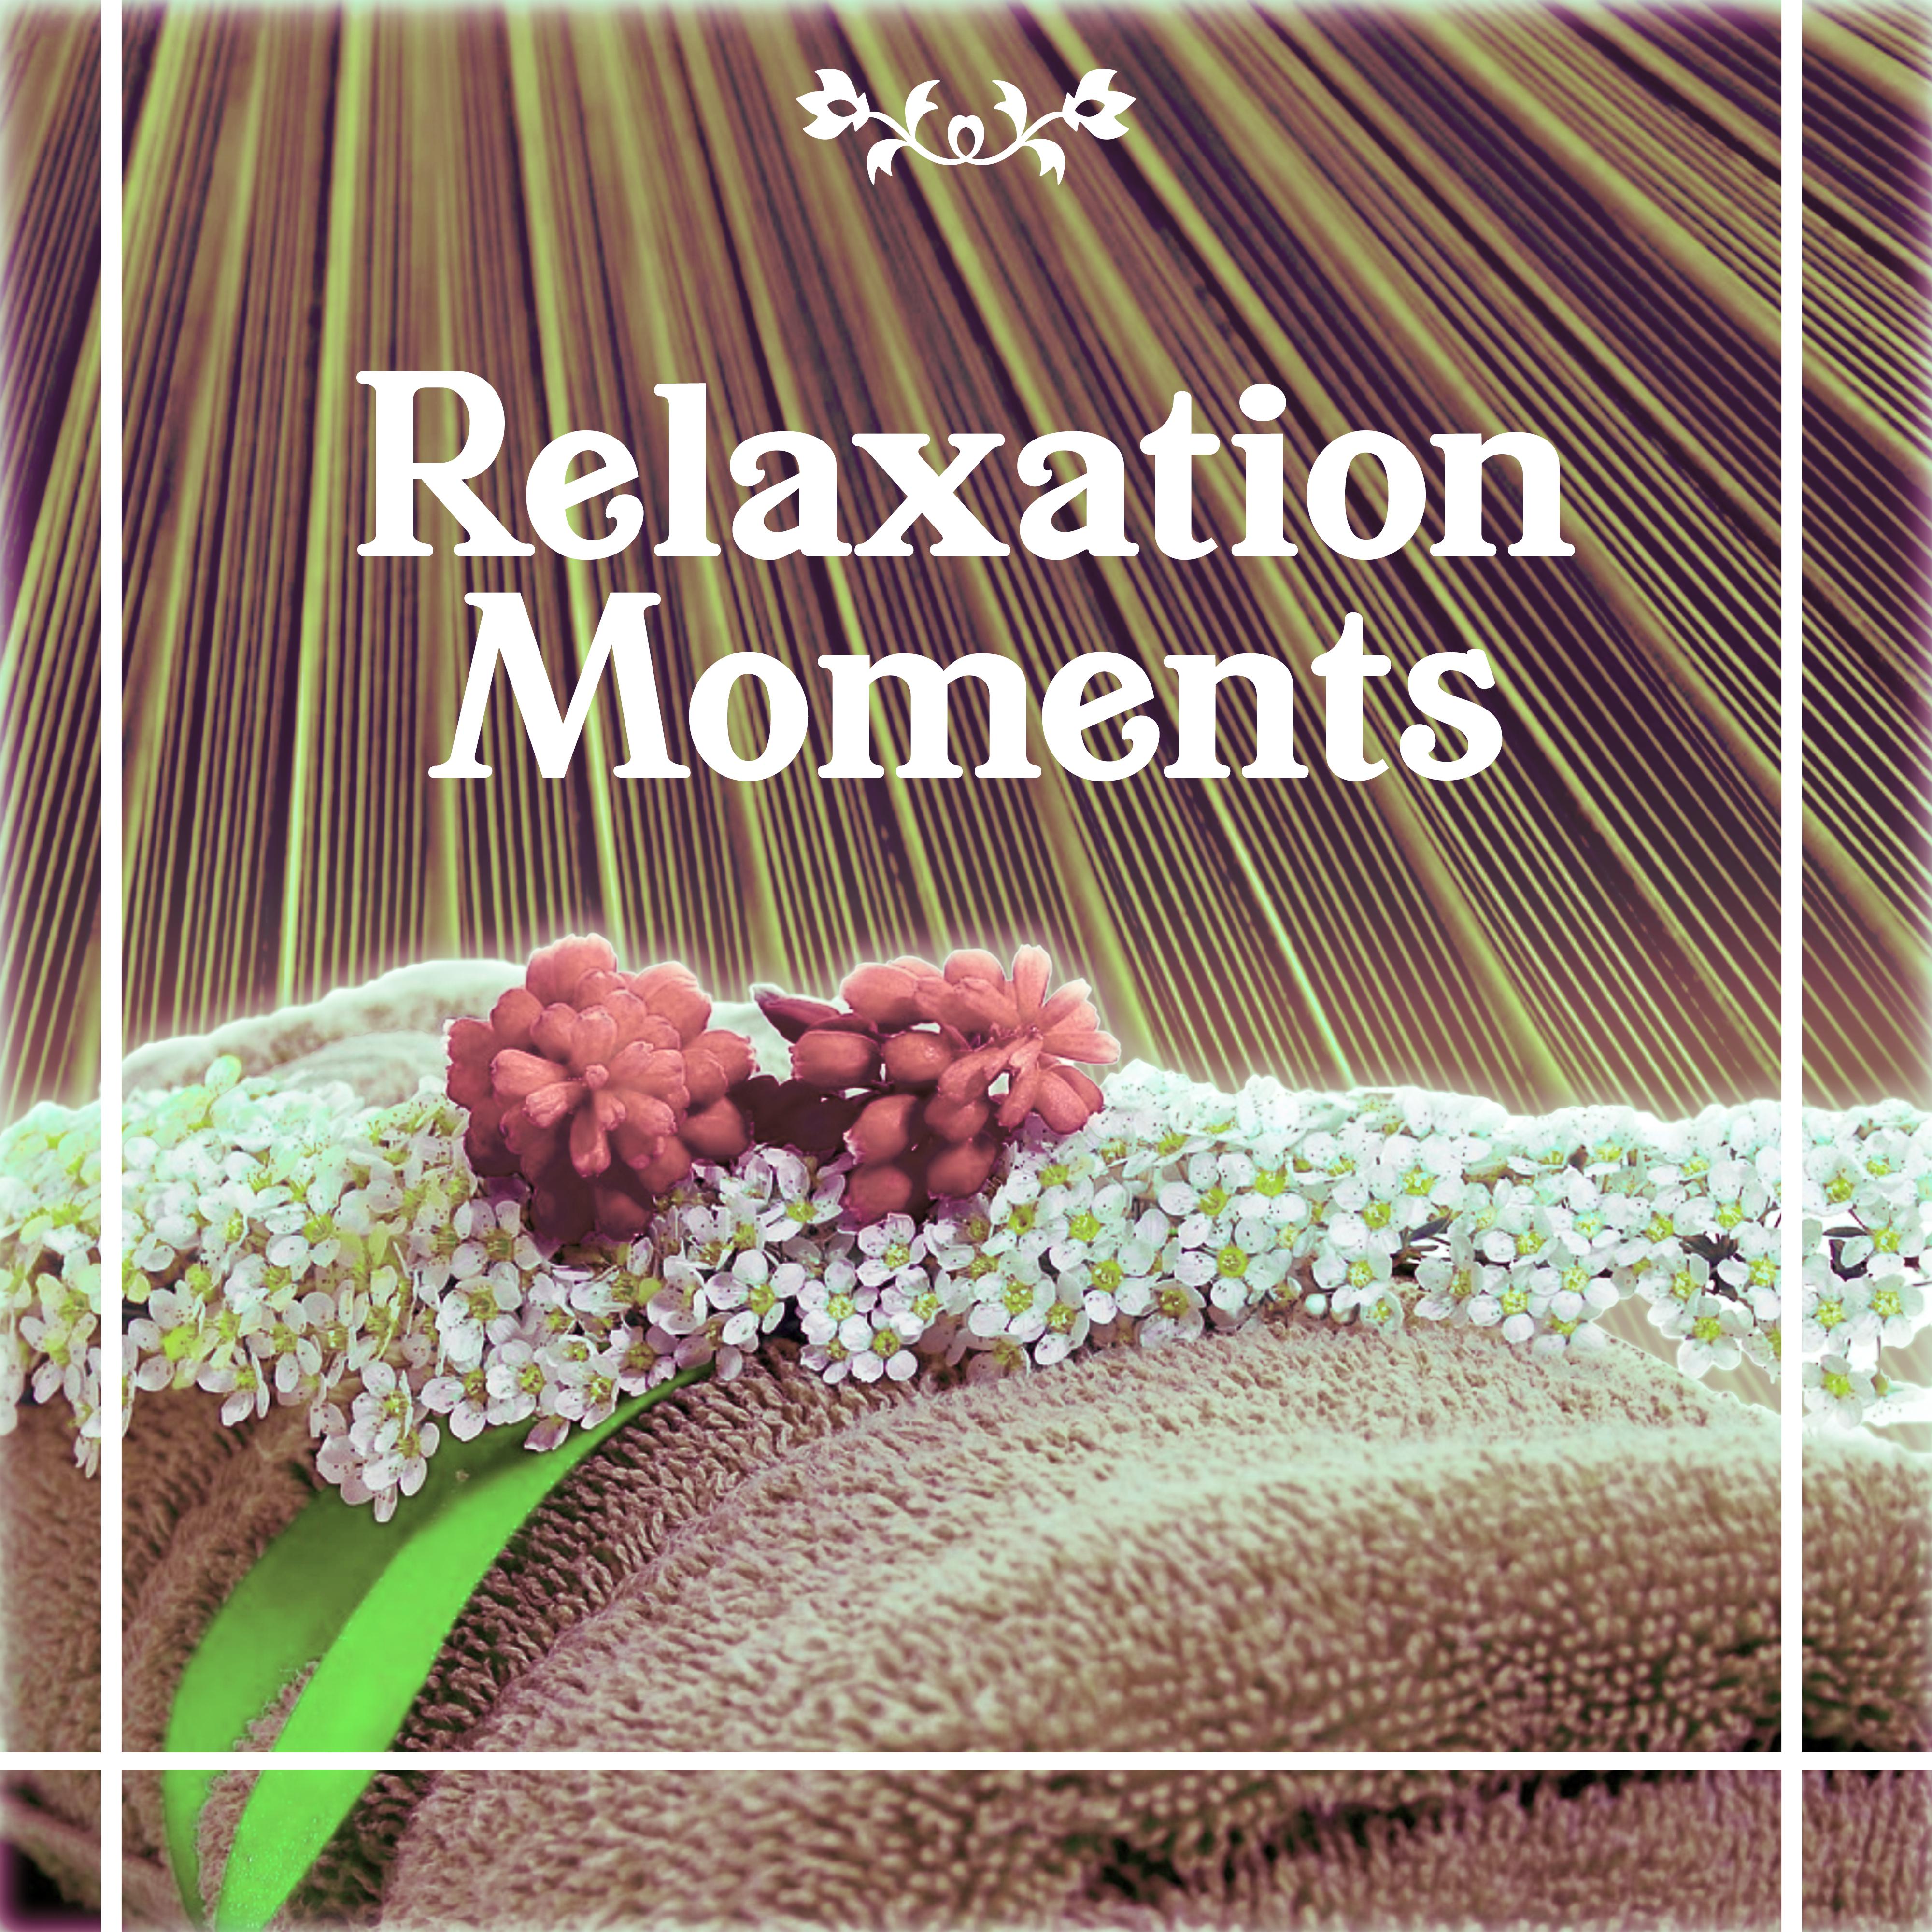 Relaxation Moments – Music for Spa, Wellness, Massage, Nature Sounds, Ocean Waves, Meditation Spa, Calm Mind